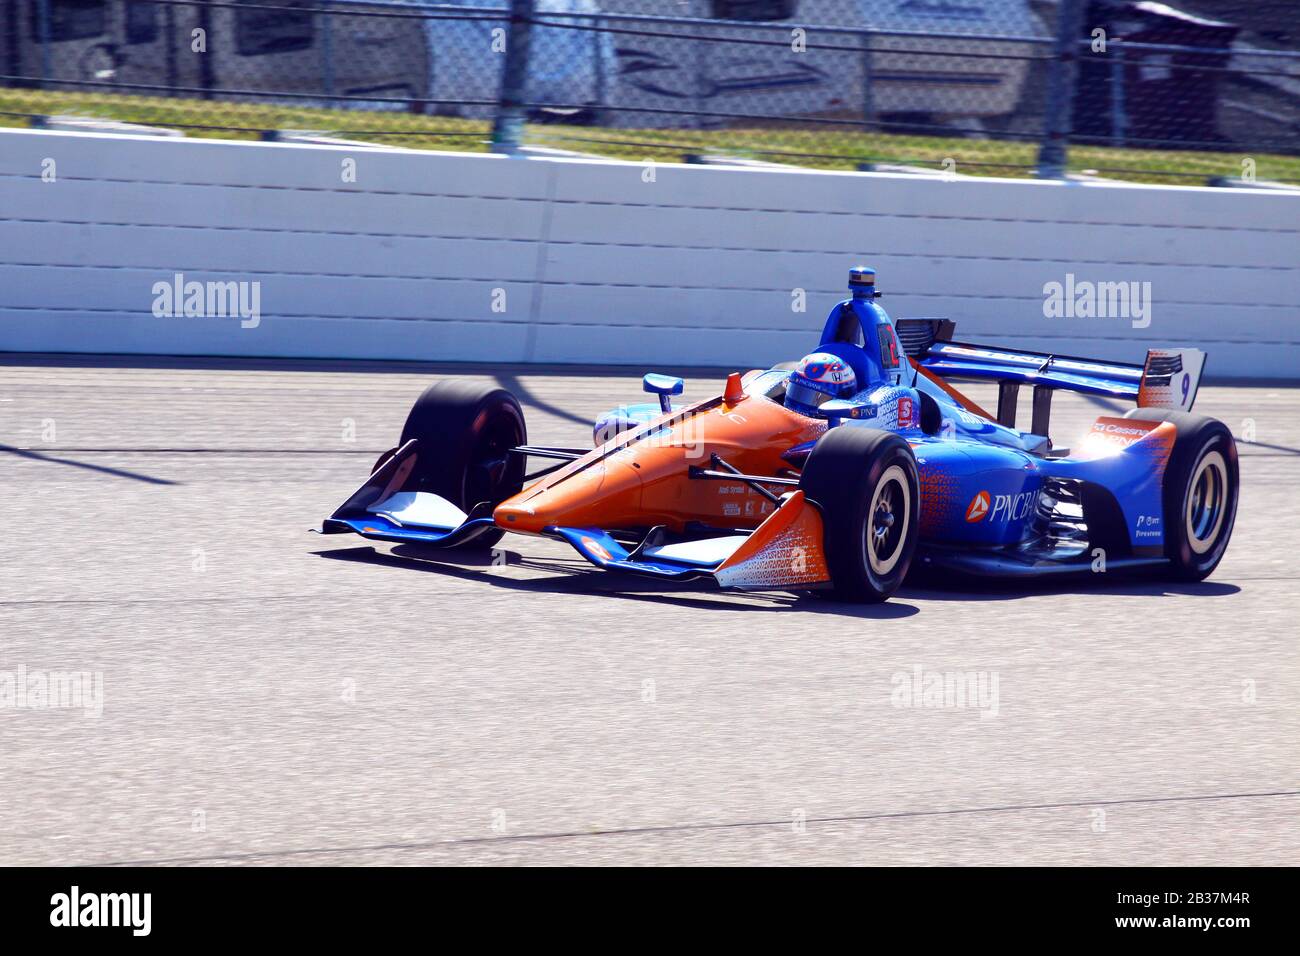 Newton Iowa, July 19, 2019: 9 Scott Dixon, New Zealand, Chip Ganassi Racing, on race track during practice session for the Iowa 300 Indycar race. Stock Photo